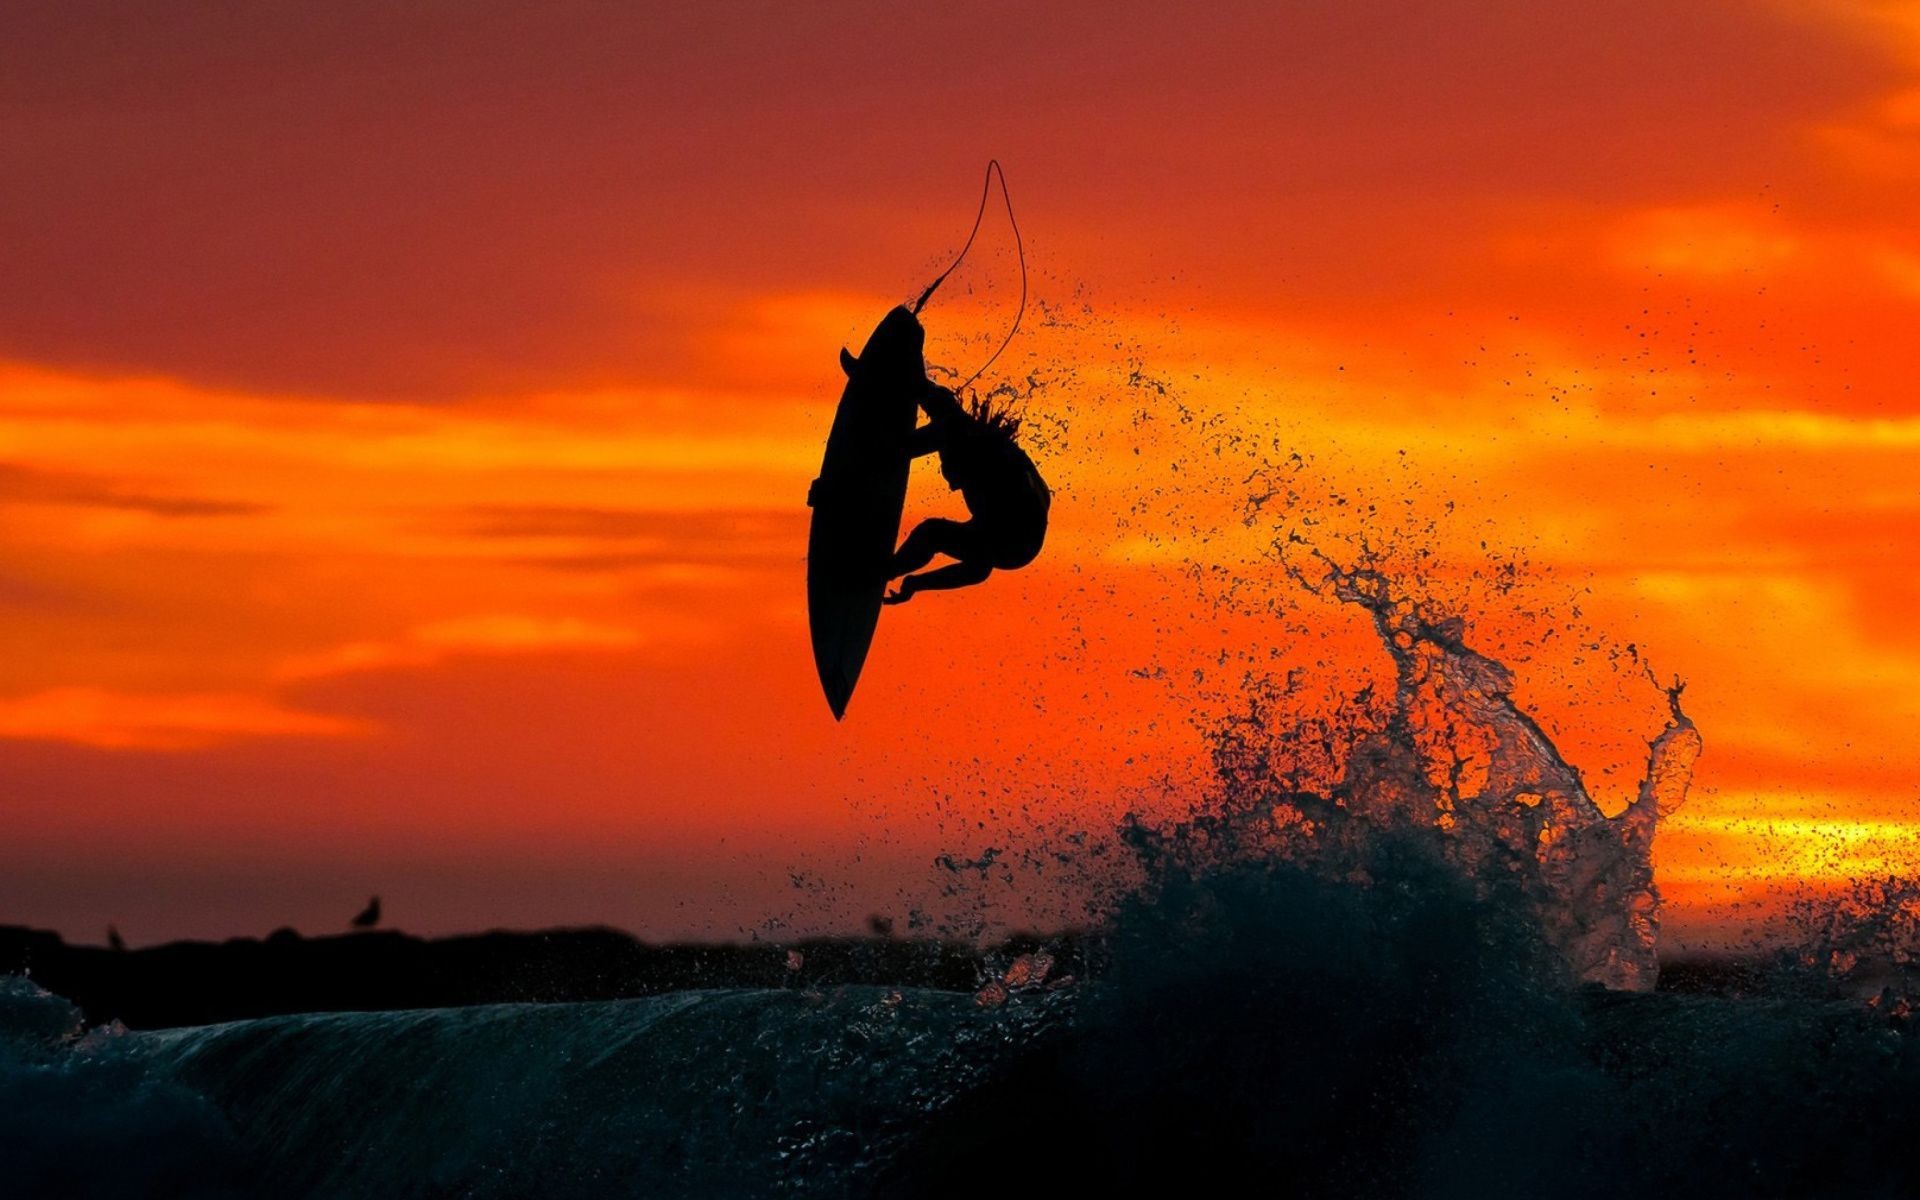 Cool Surfing Wallpapers